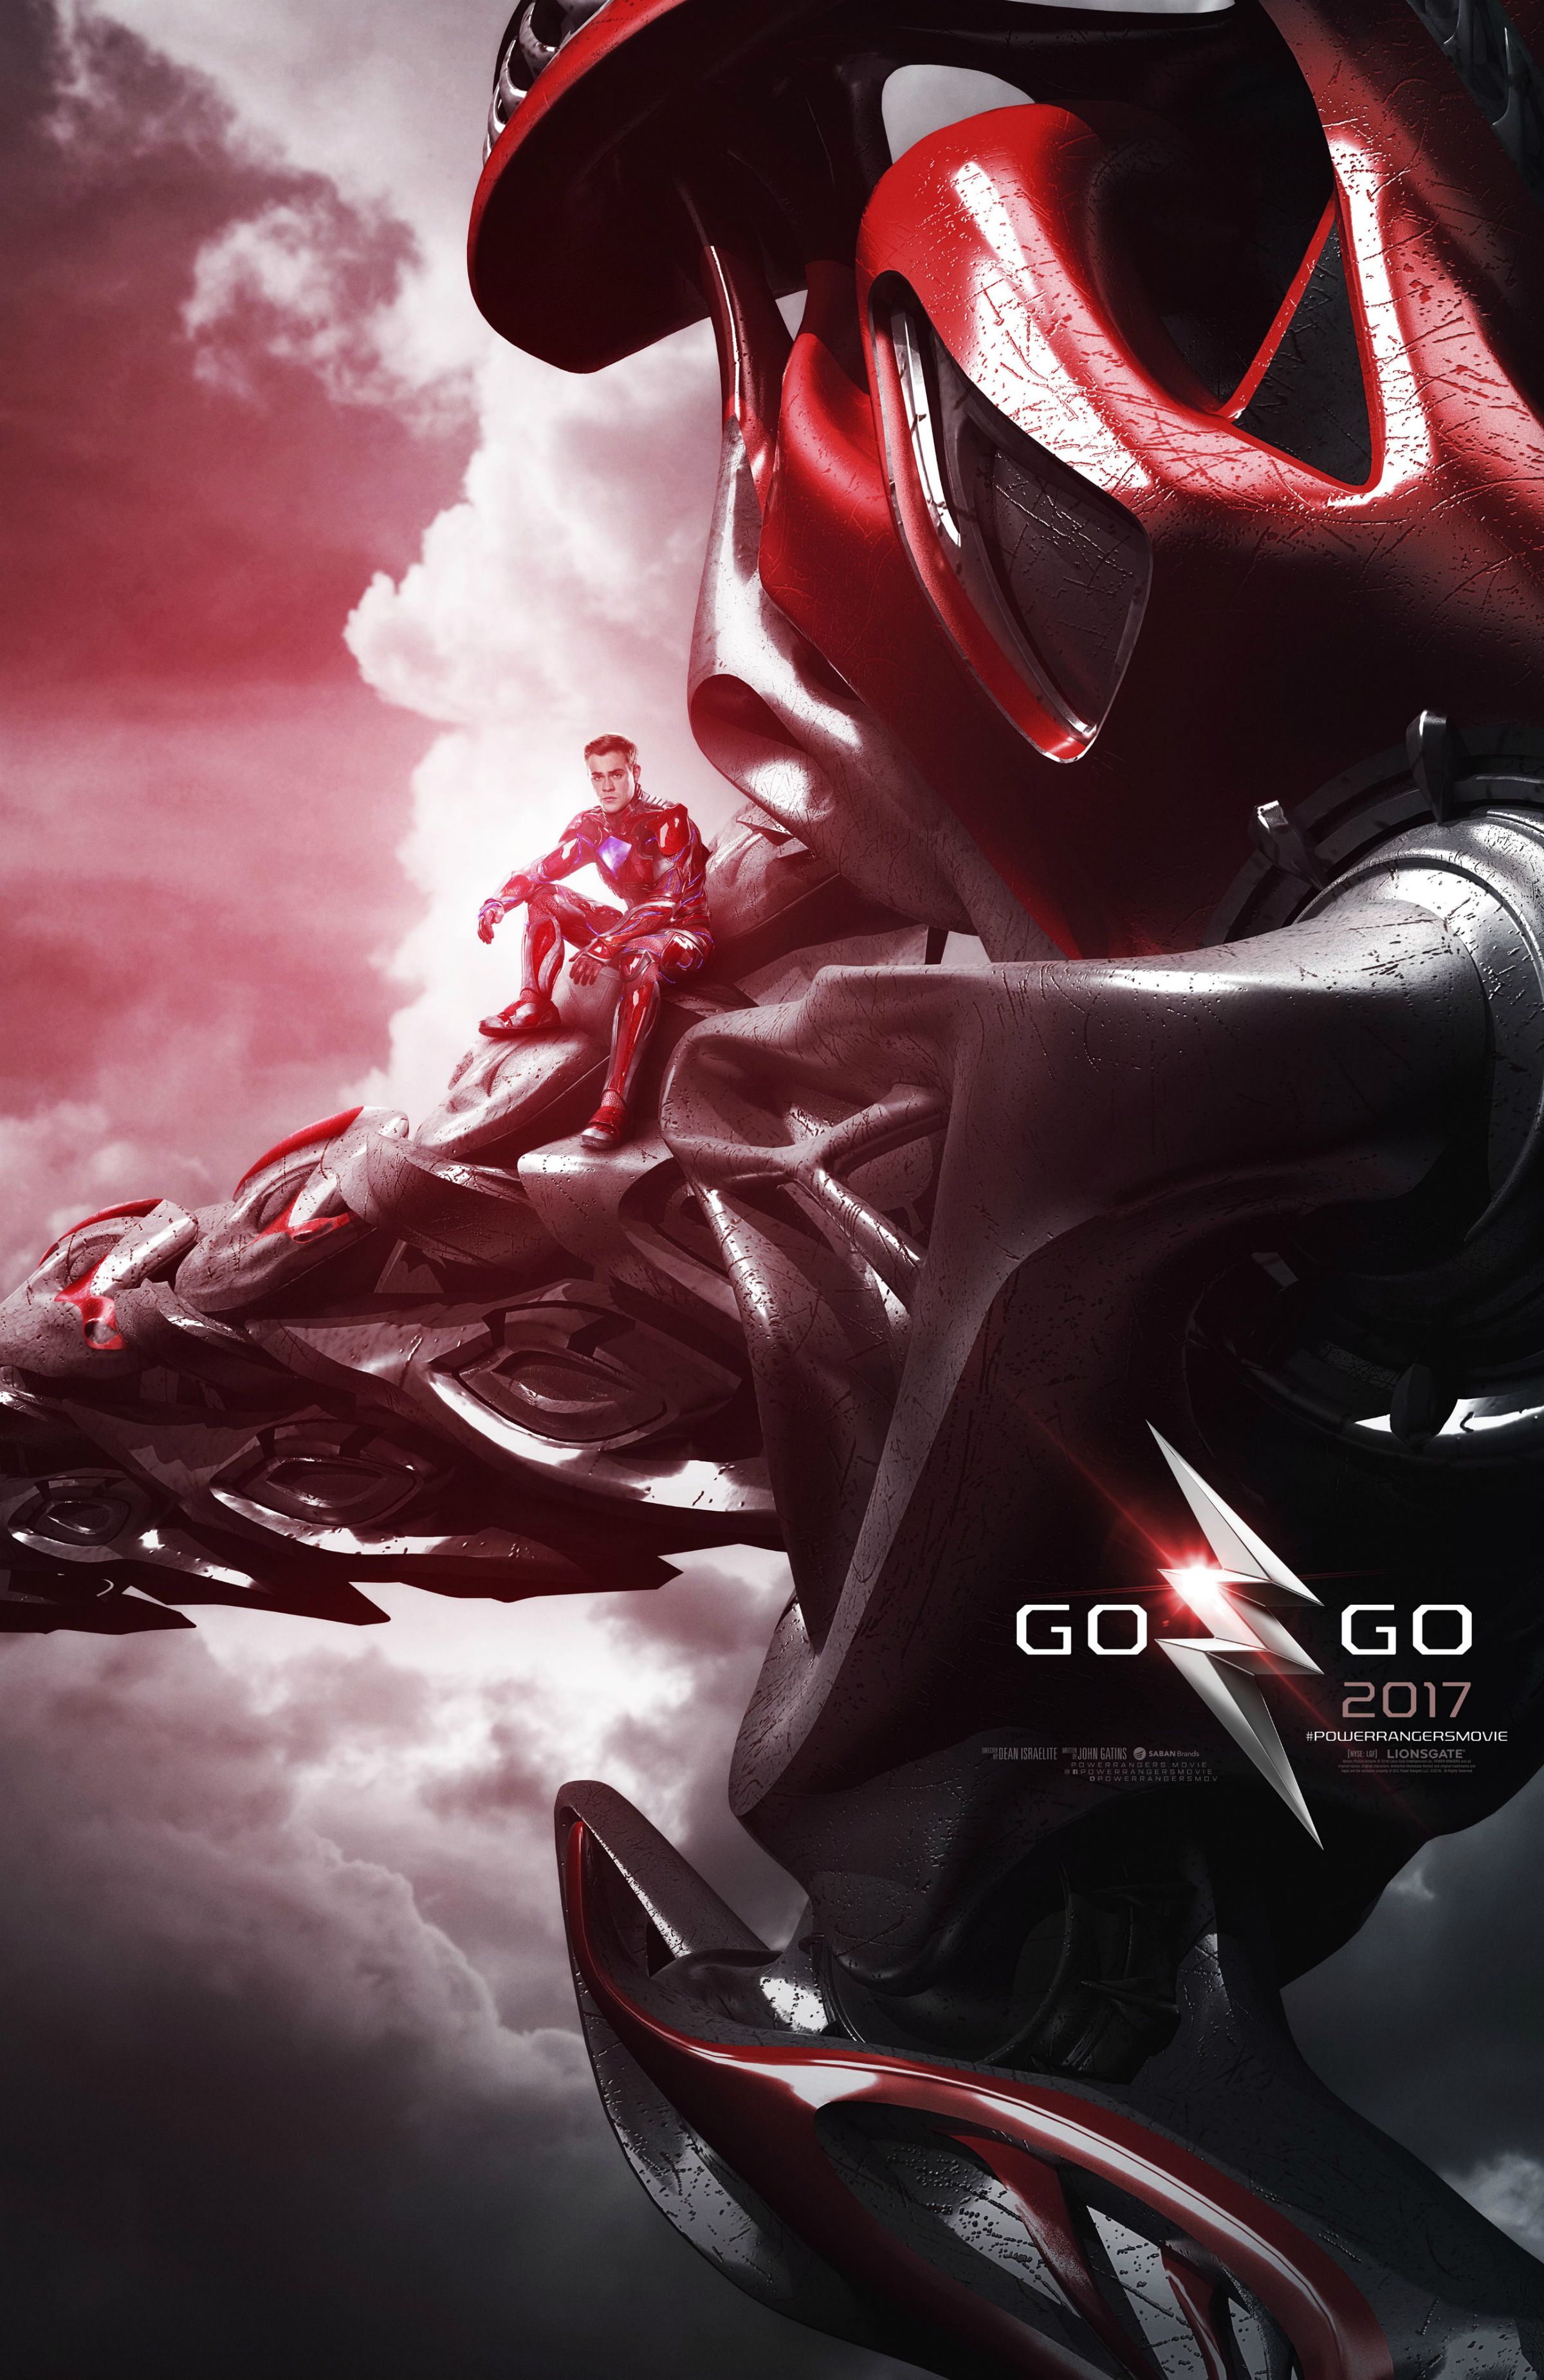 Power Rangers Posters Feature the Rangers’ Zords; NYCC Panel Details